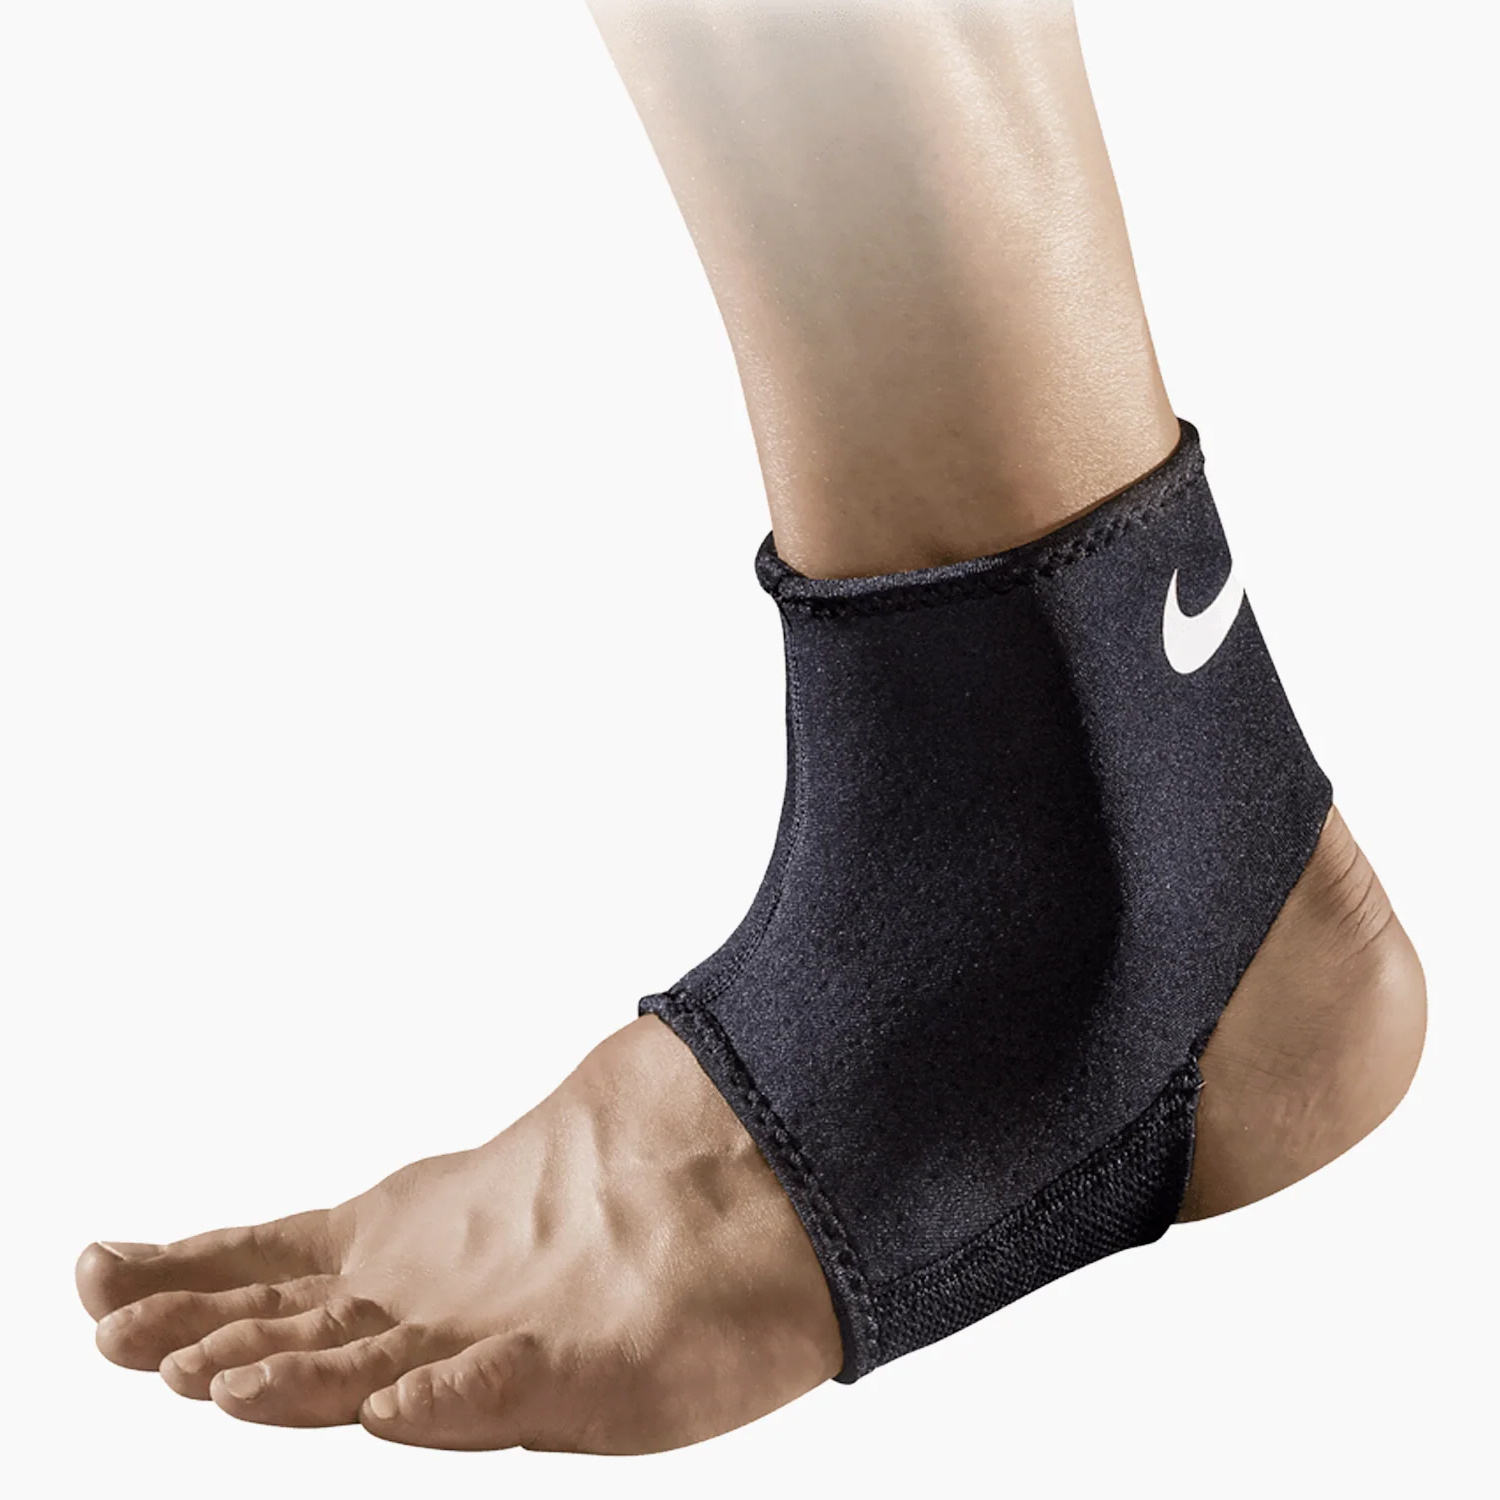 Pro Ankle Sleeve 2.0